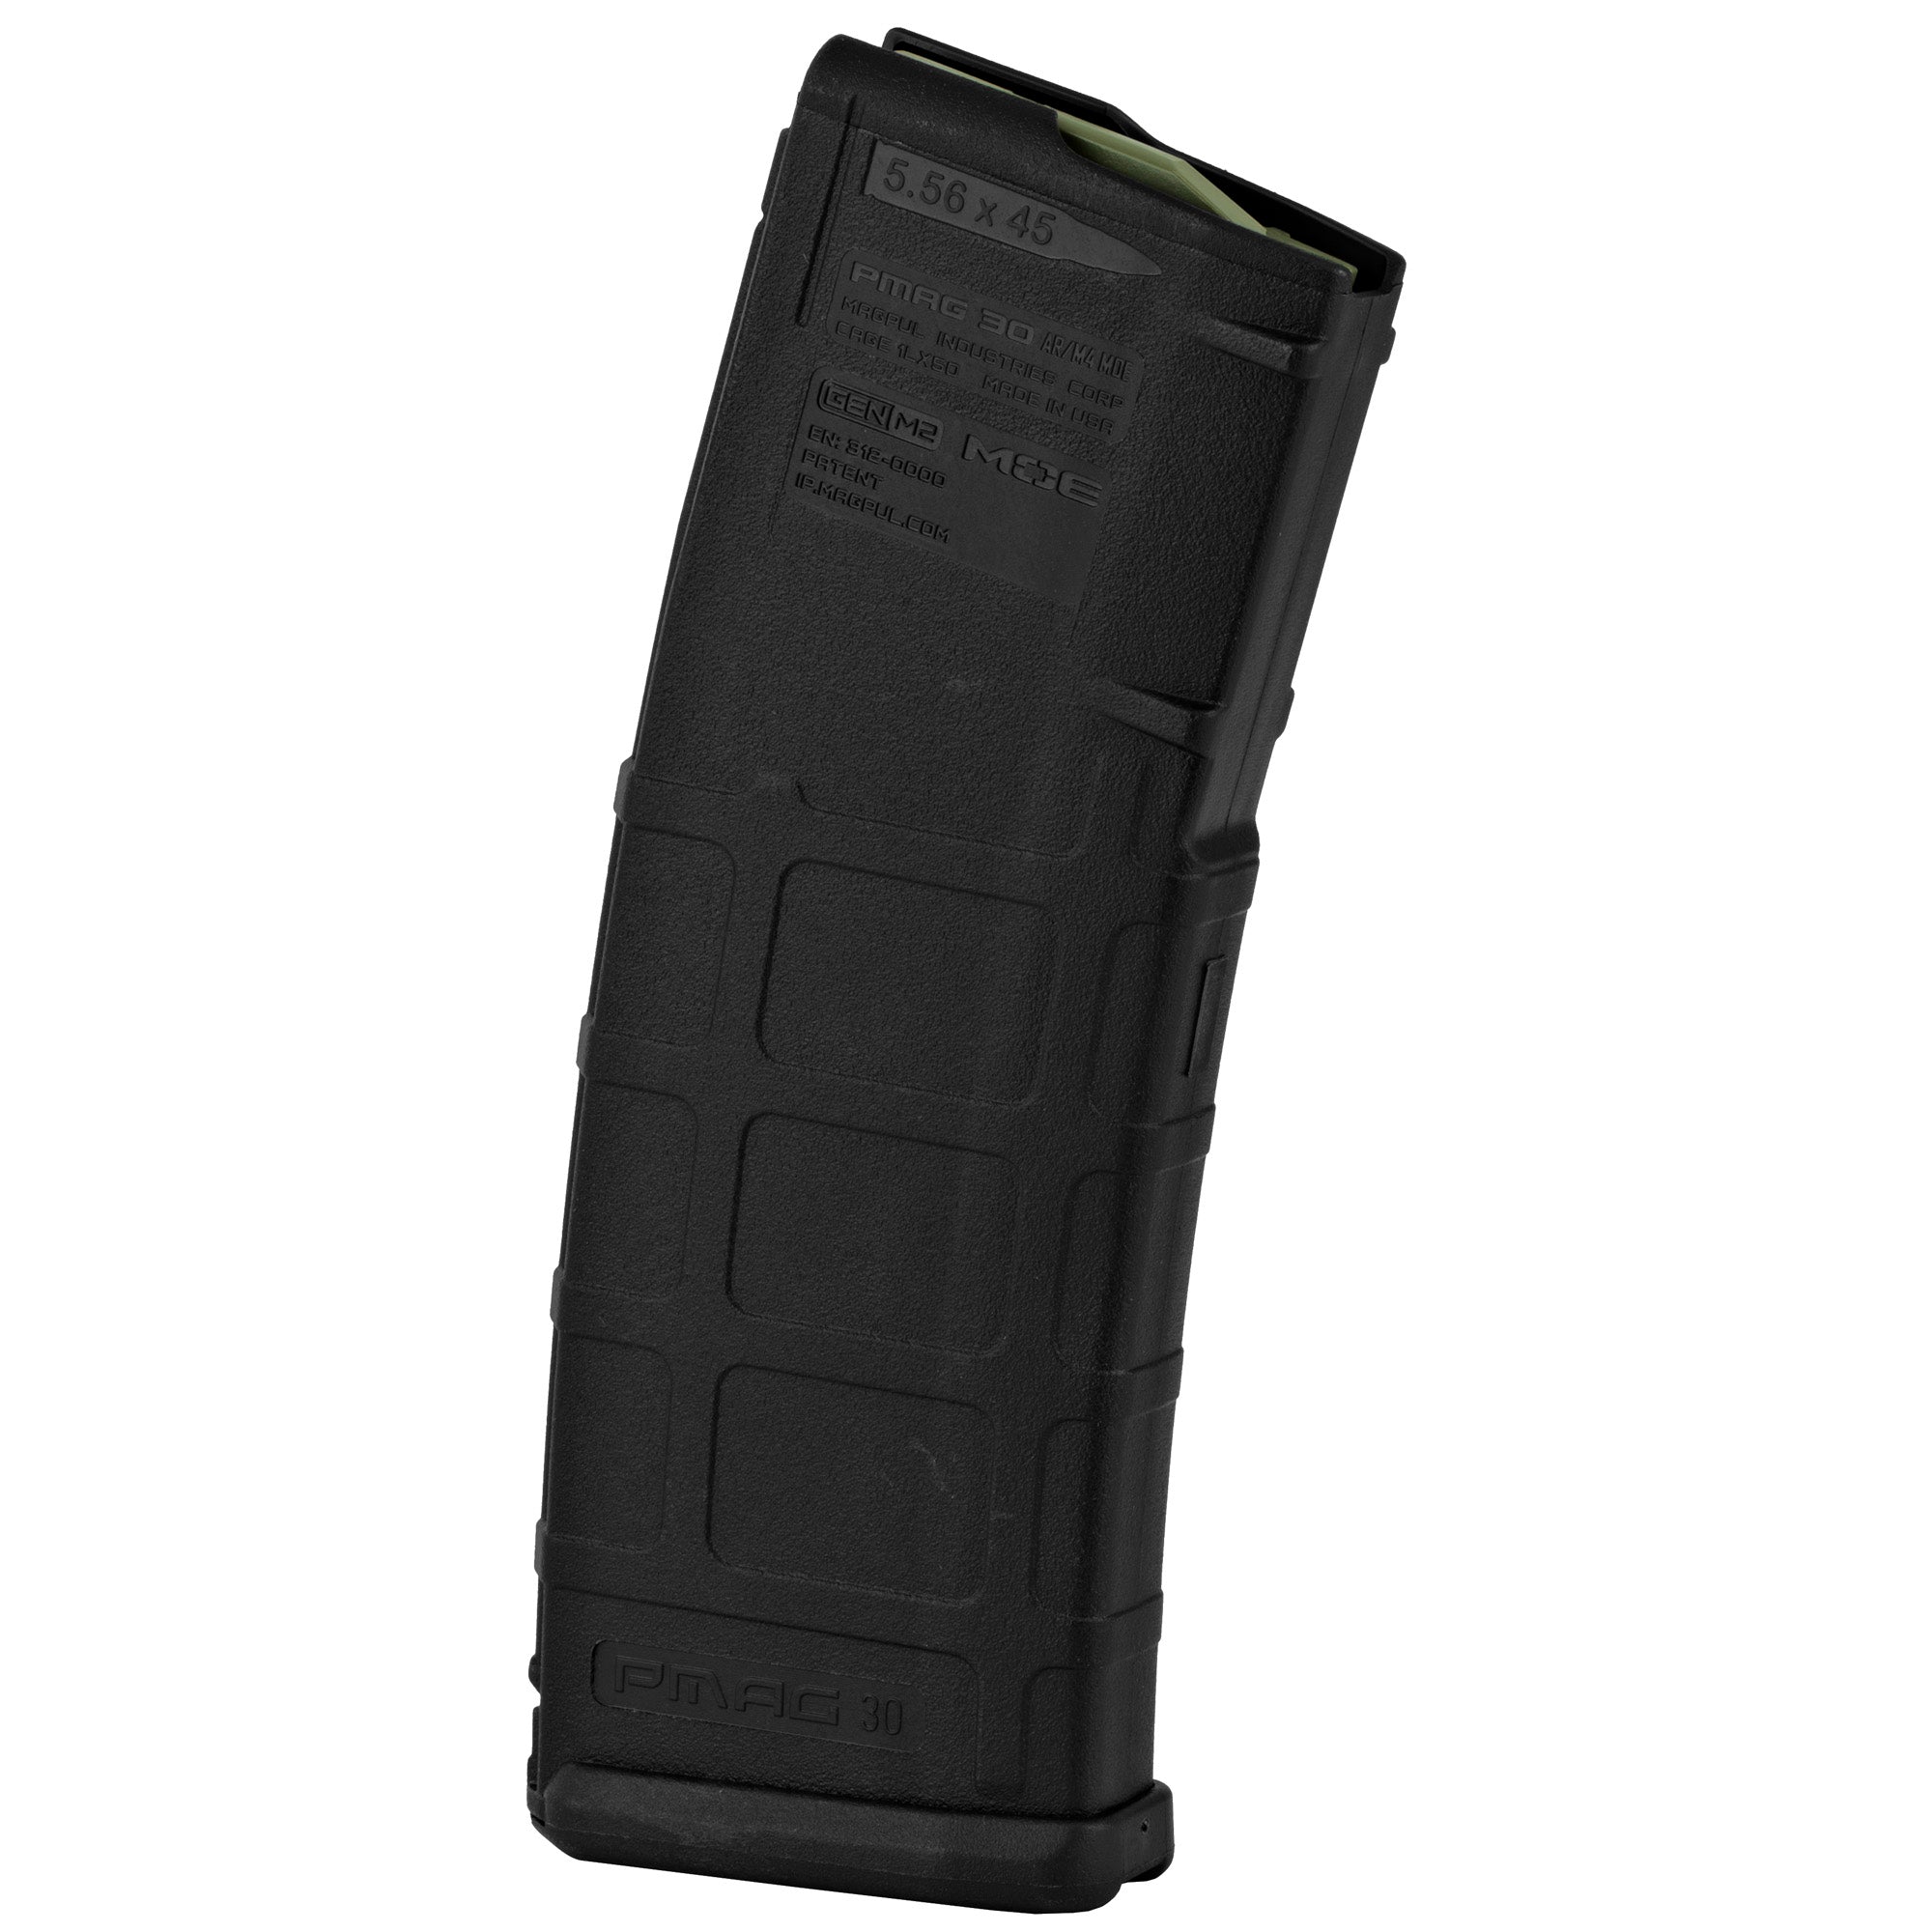 Magpul PMAG 30 AR/M4 GEN M2 MOE Magazine - durable, 30-round capacity for 5.56/.223 calibers, black polymer.